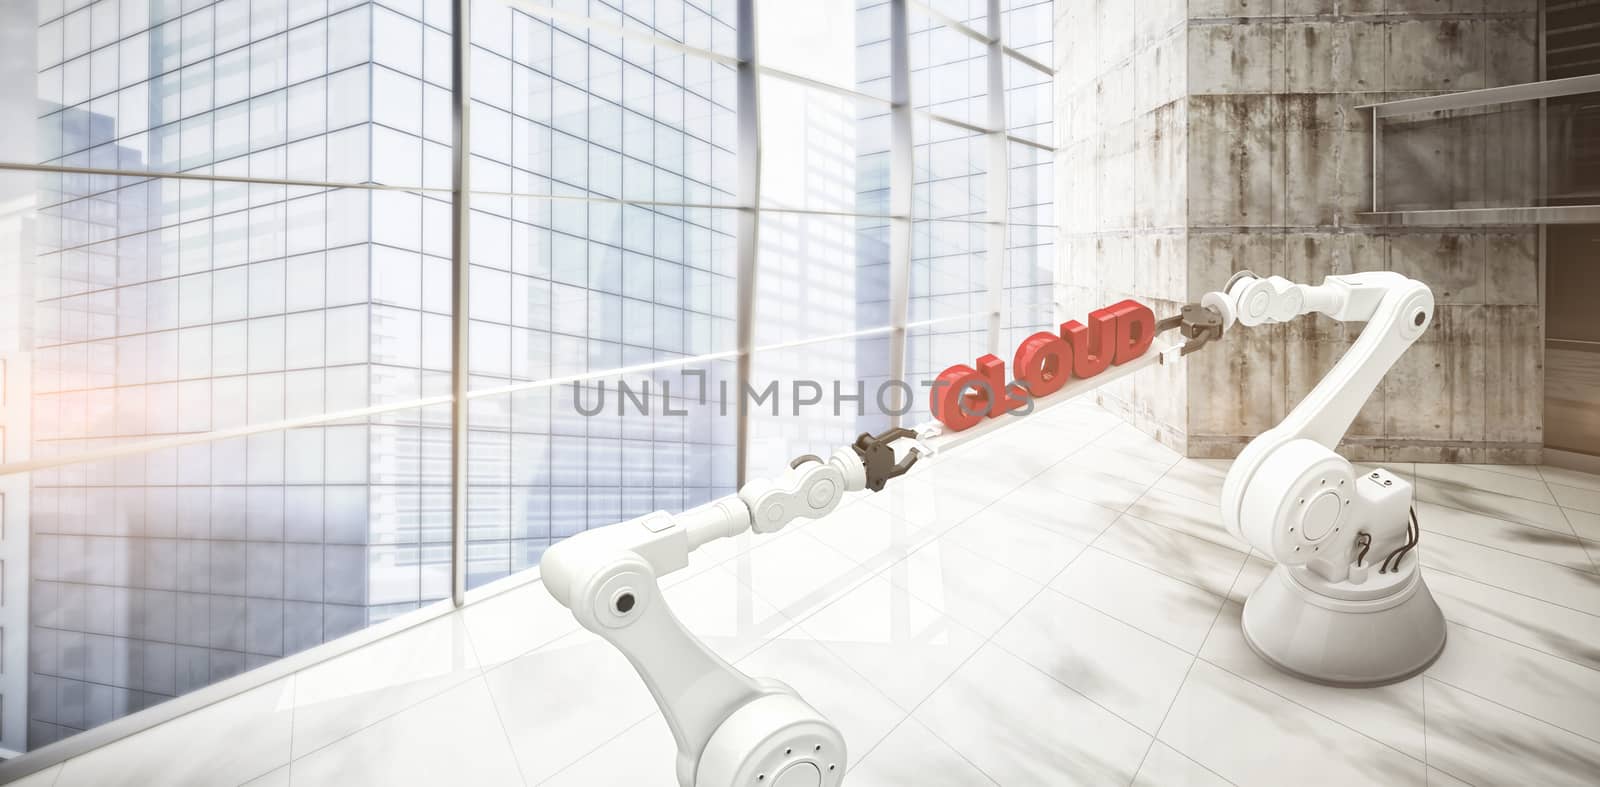 Metallic robotic hands holding red cloud text over white background against modern room overlooking city